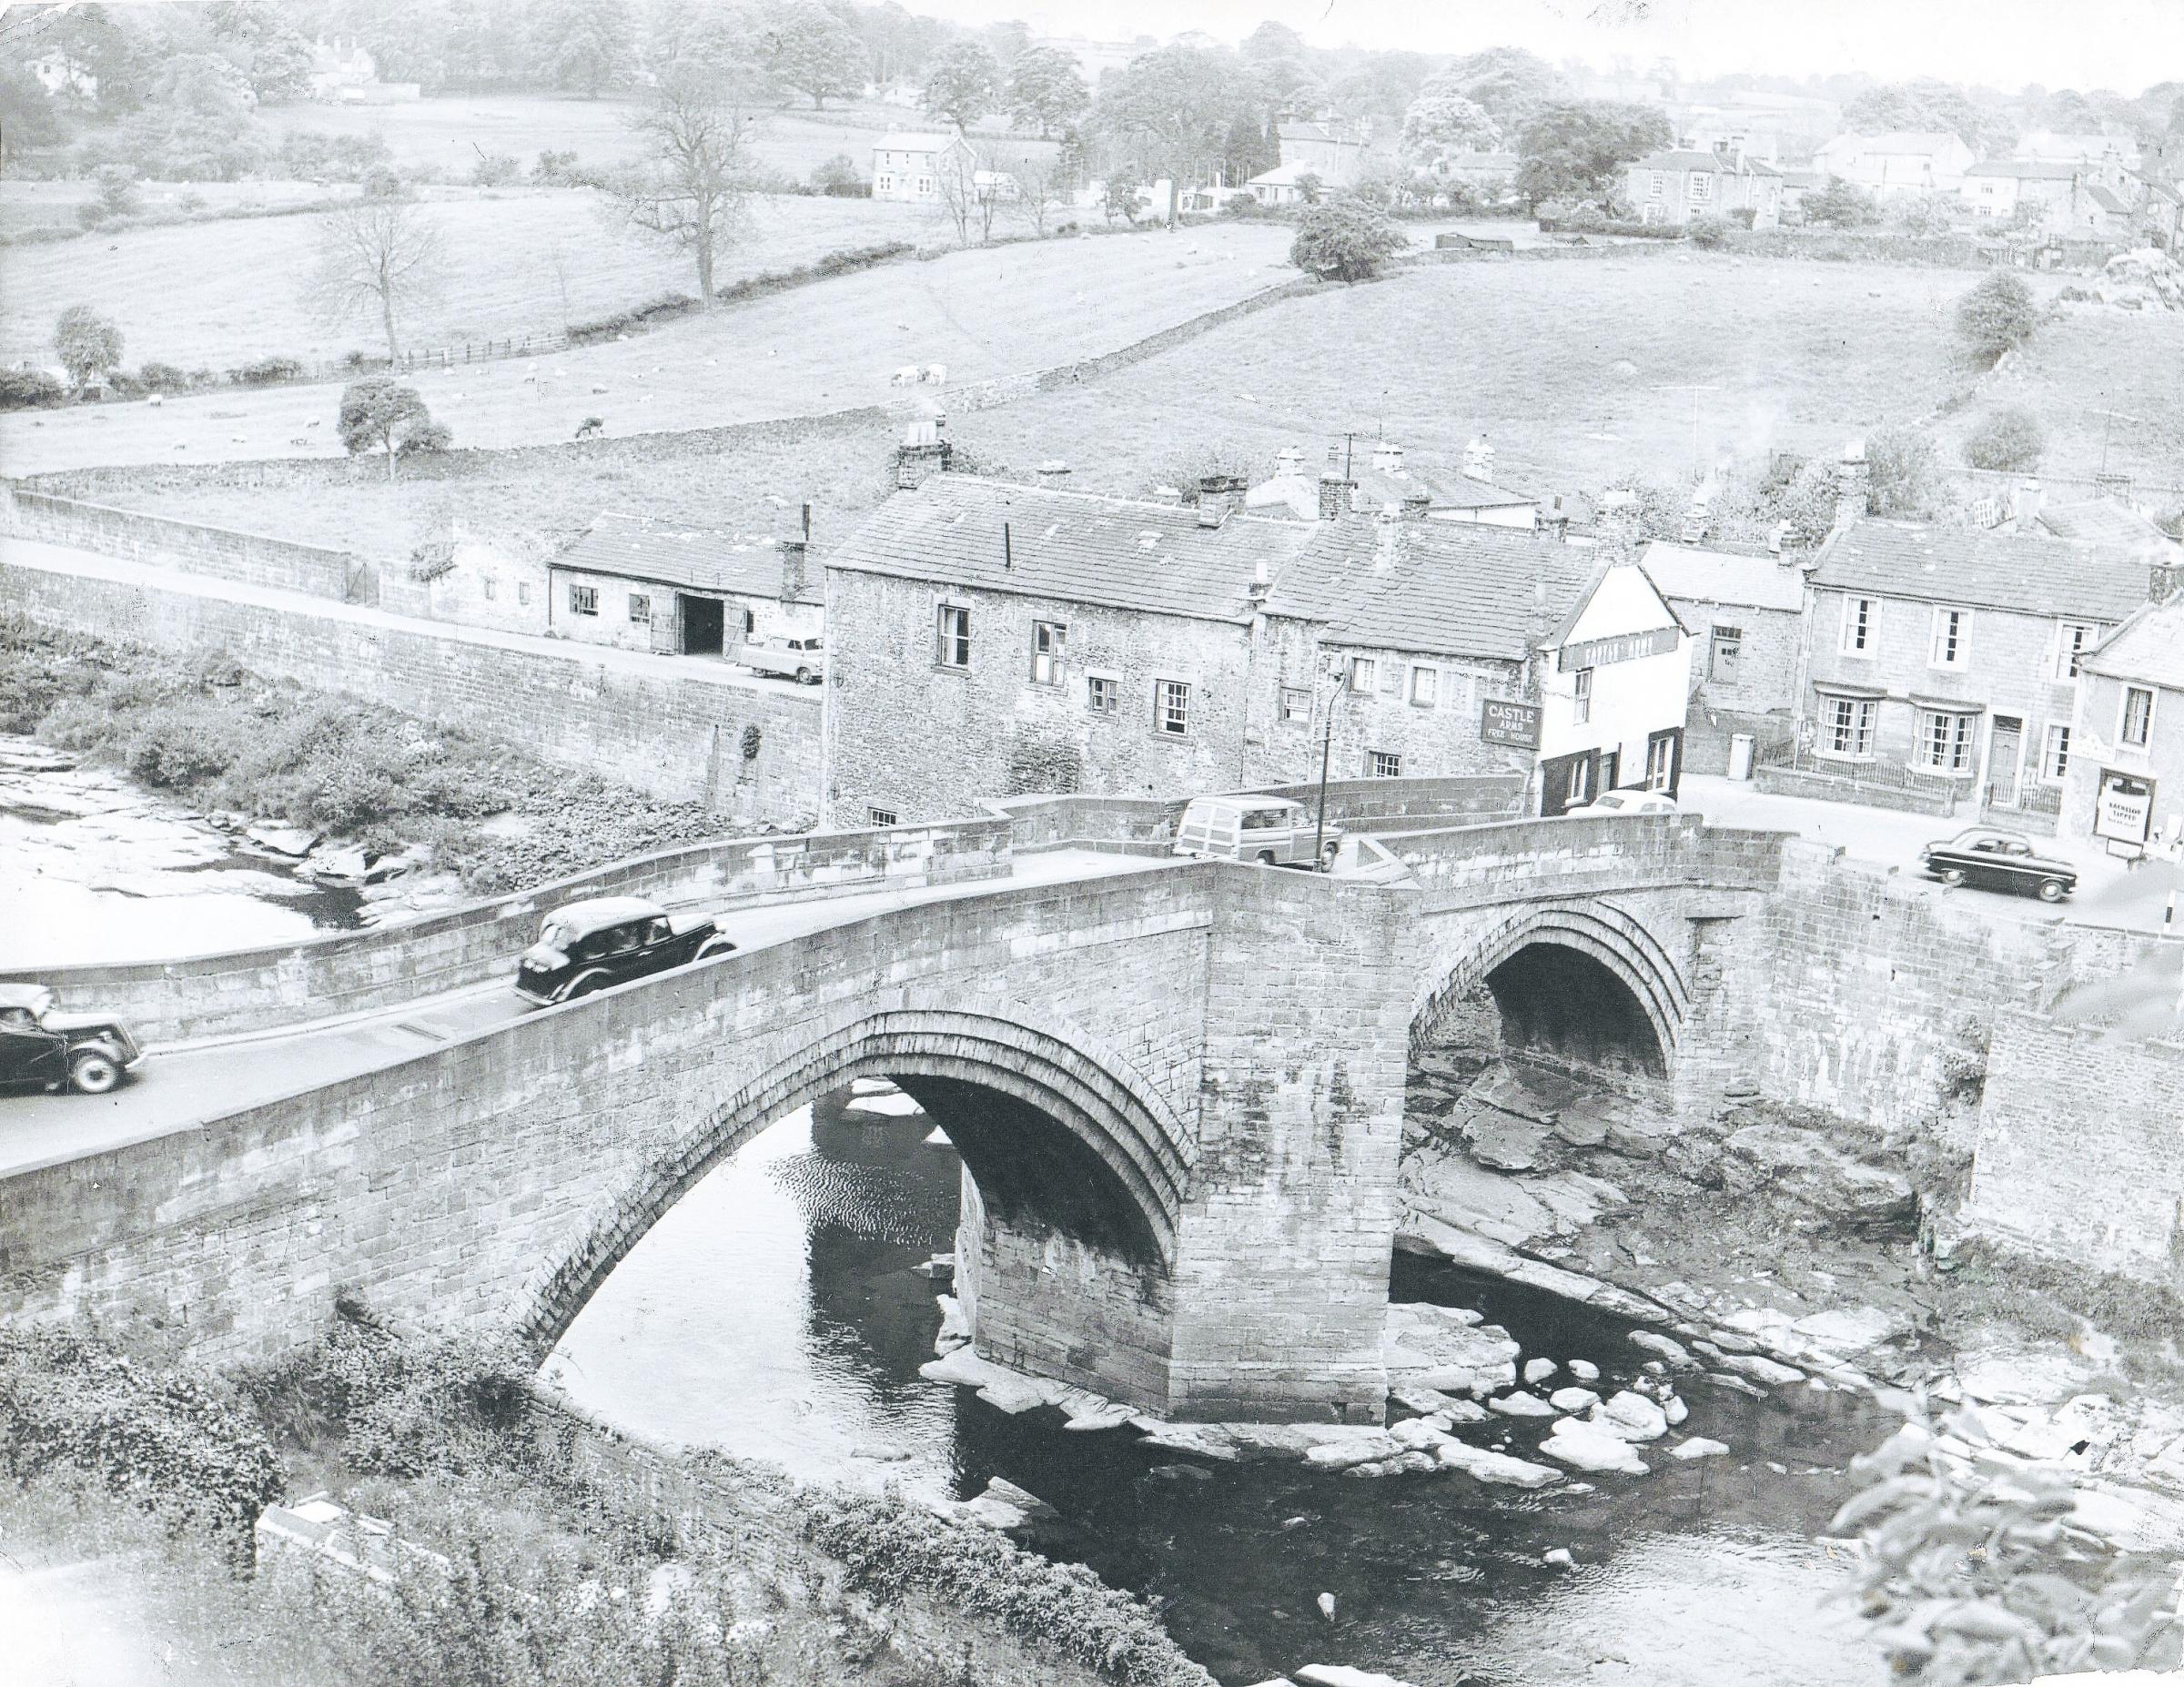 Bridge End, Startforth, seen from the Barnard Castle side of the river in May 1959. It was here that three London cheesemongers grew up